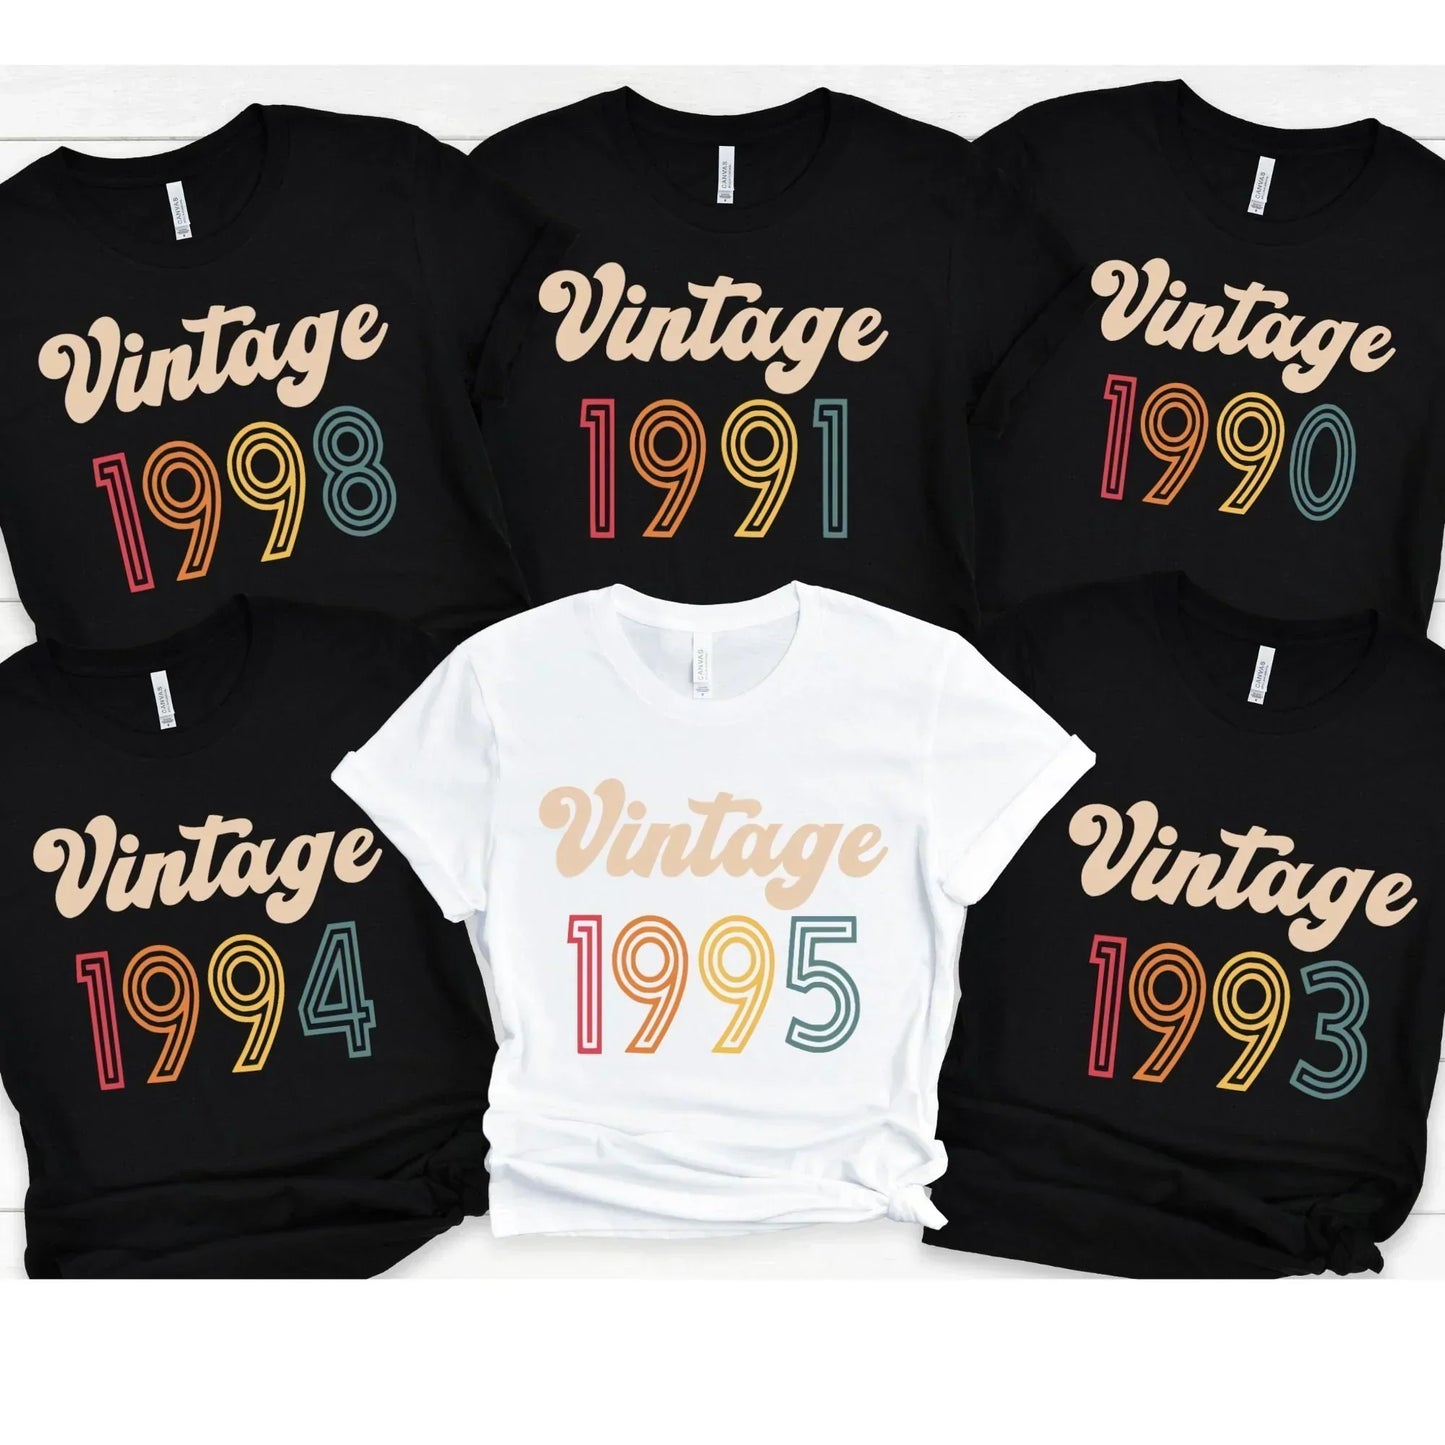 Vintage Birthday Shirts, Great for 90s babies, 30th Birthday T-shirt or 25th, 26th, 27th, 28th, 29th Birthday Gift for Party Celebration HMDesignStudioUS